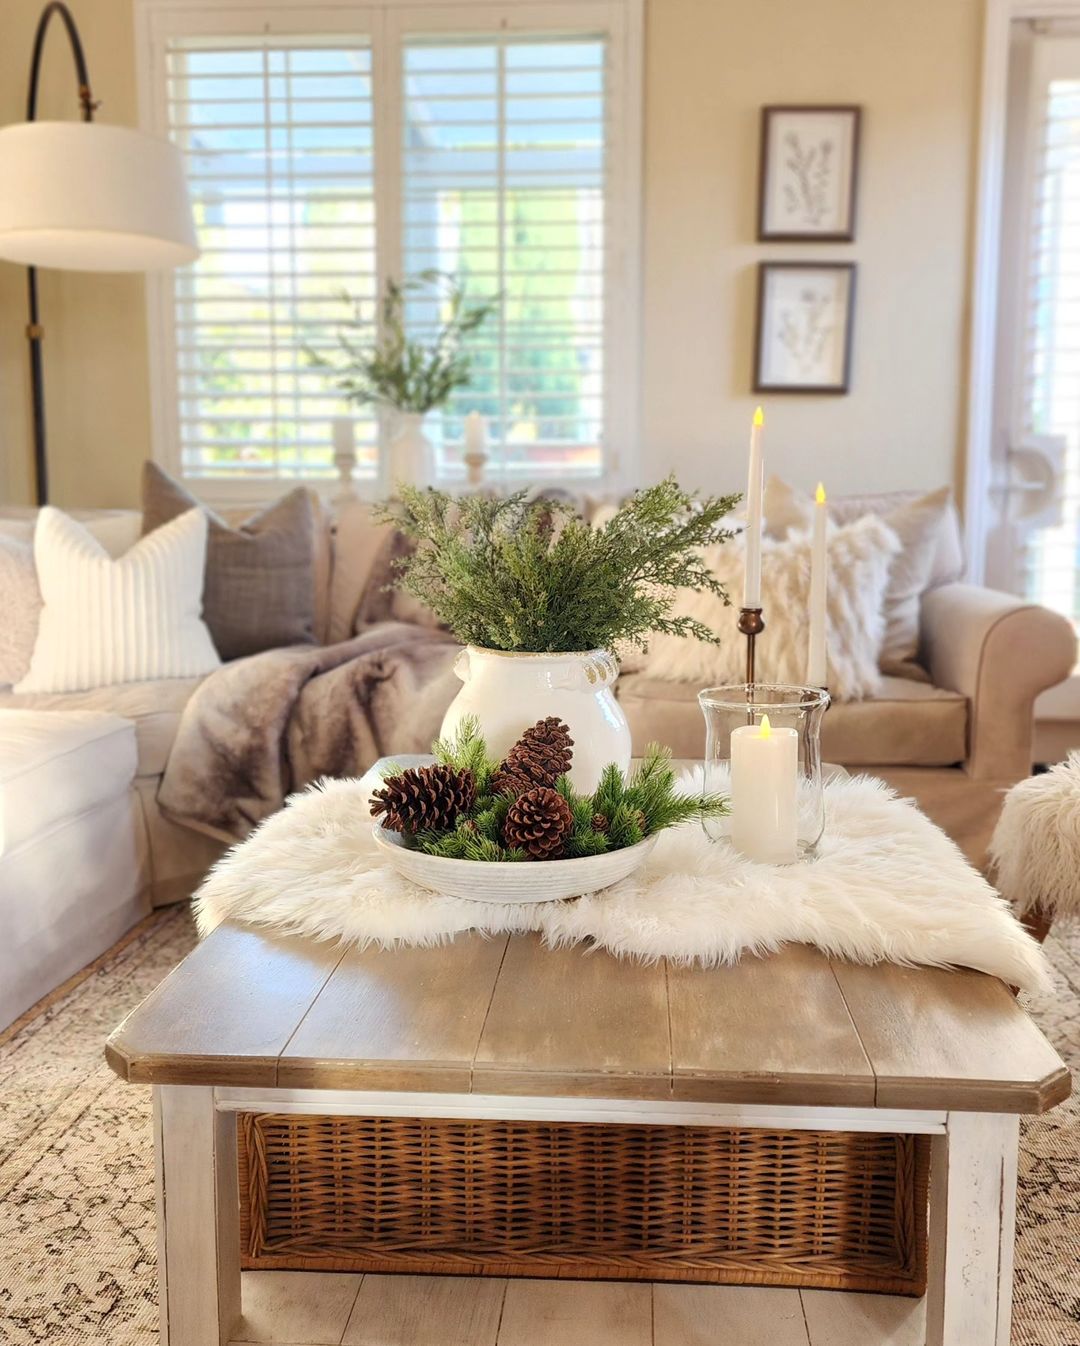 centrepiece with natural winter decor elements like pinecones and a candle can add an uplifting winter vibe to any living space as this one